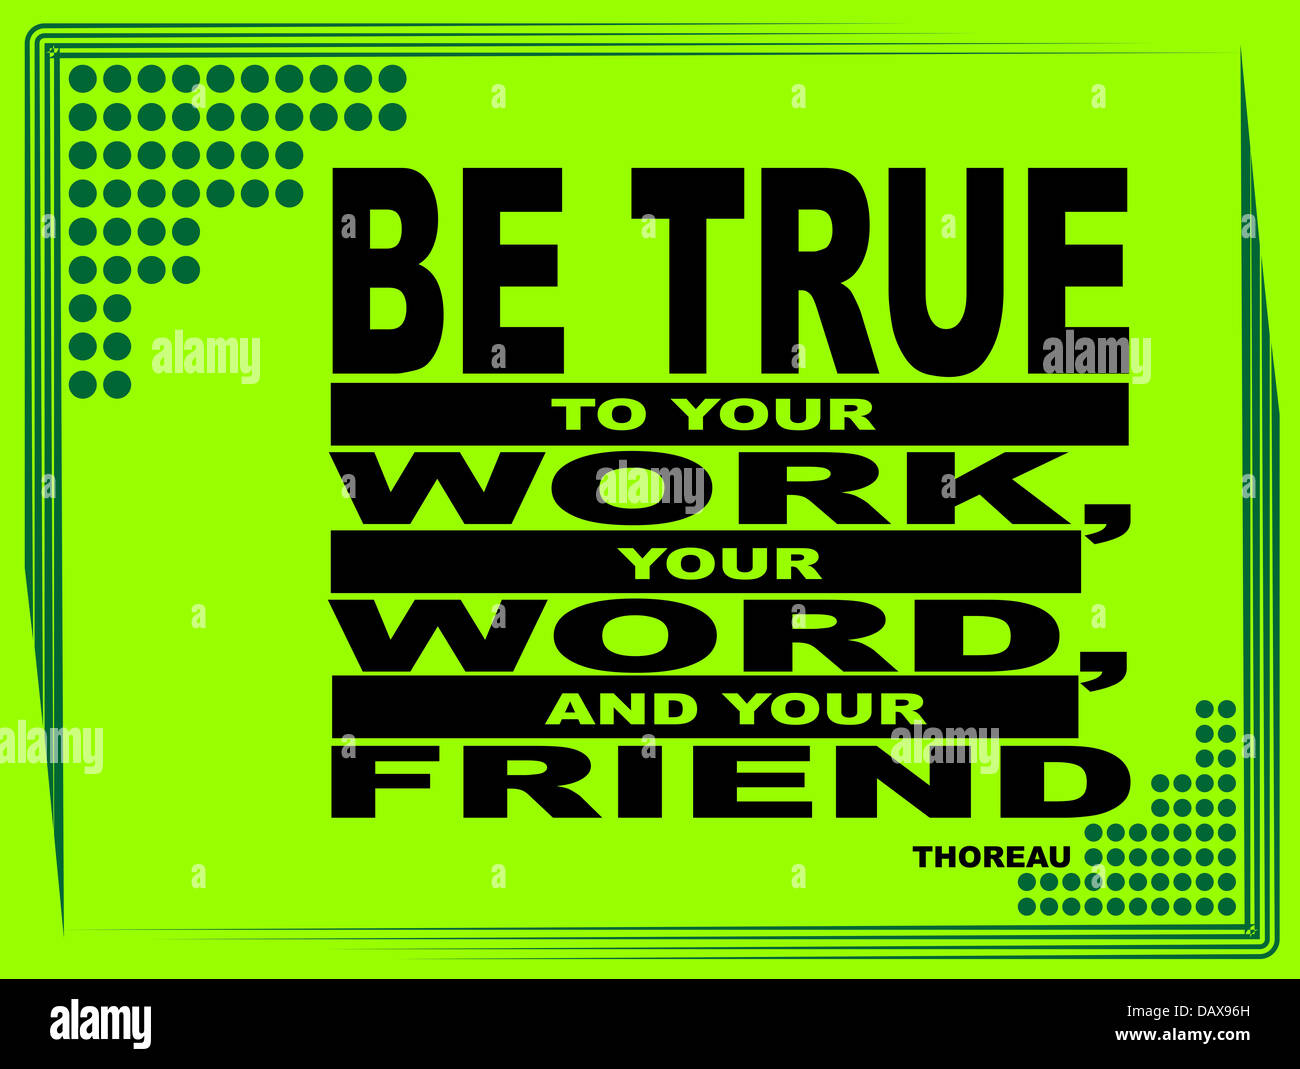 Poster or wallpaper with an inspiring phrase: Be true to your work , your word and your friend - Thoreau Stock Photo